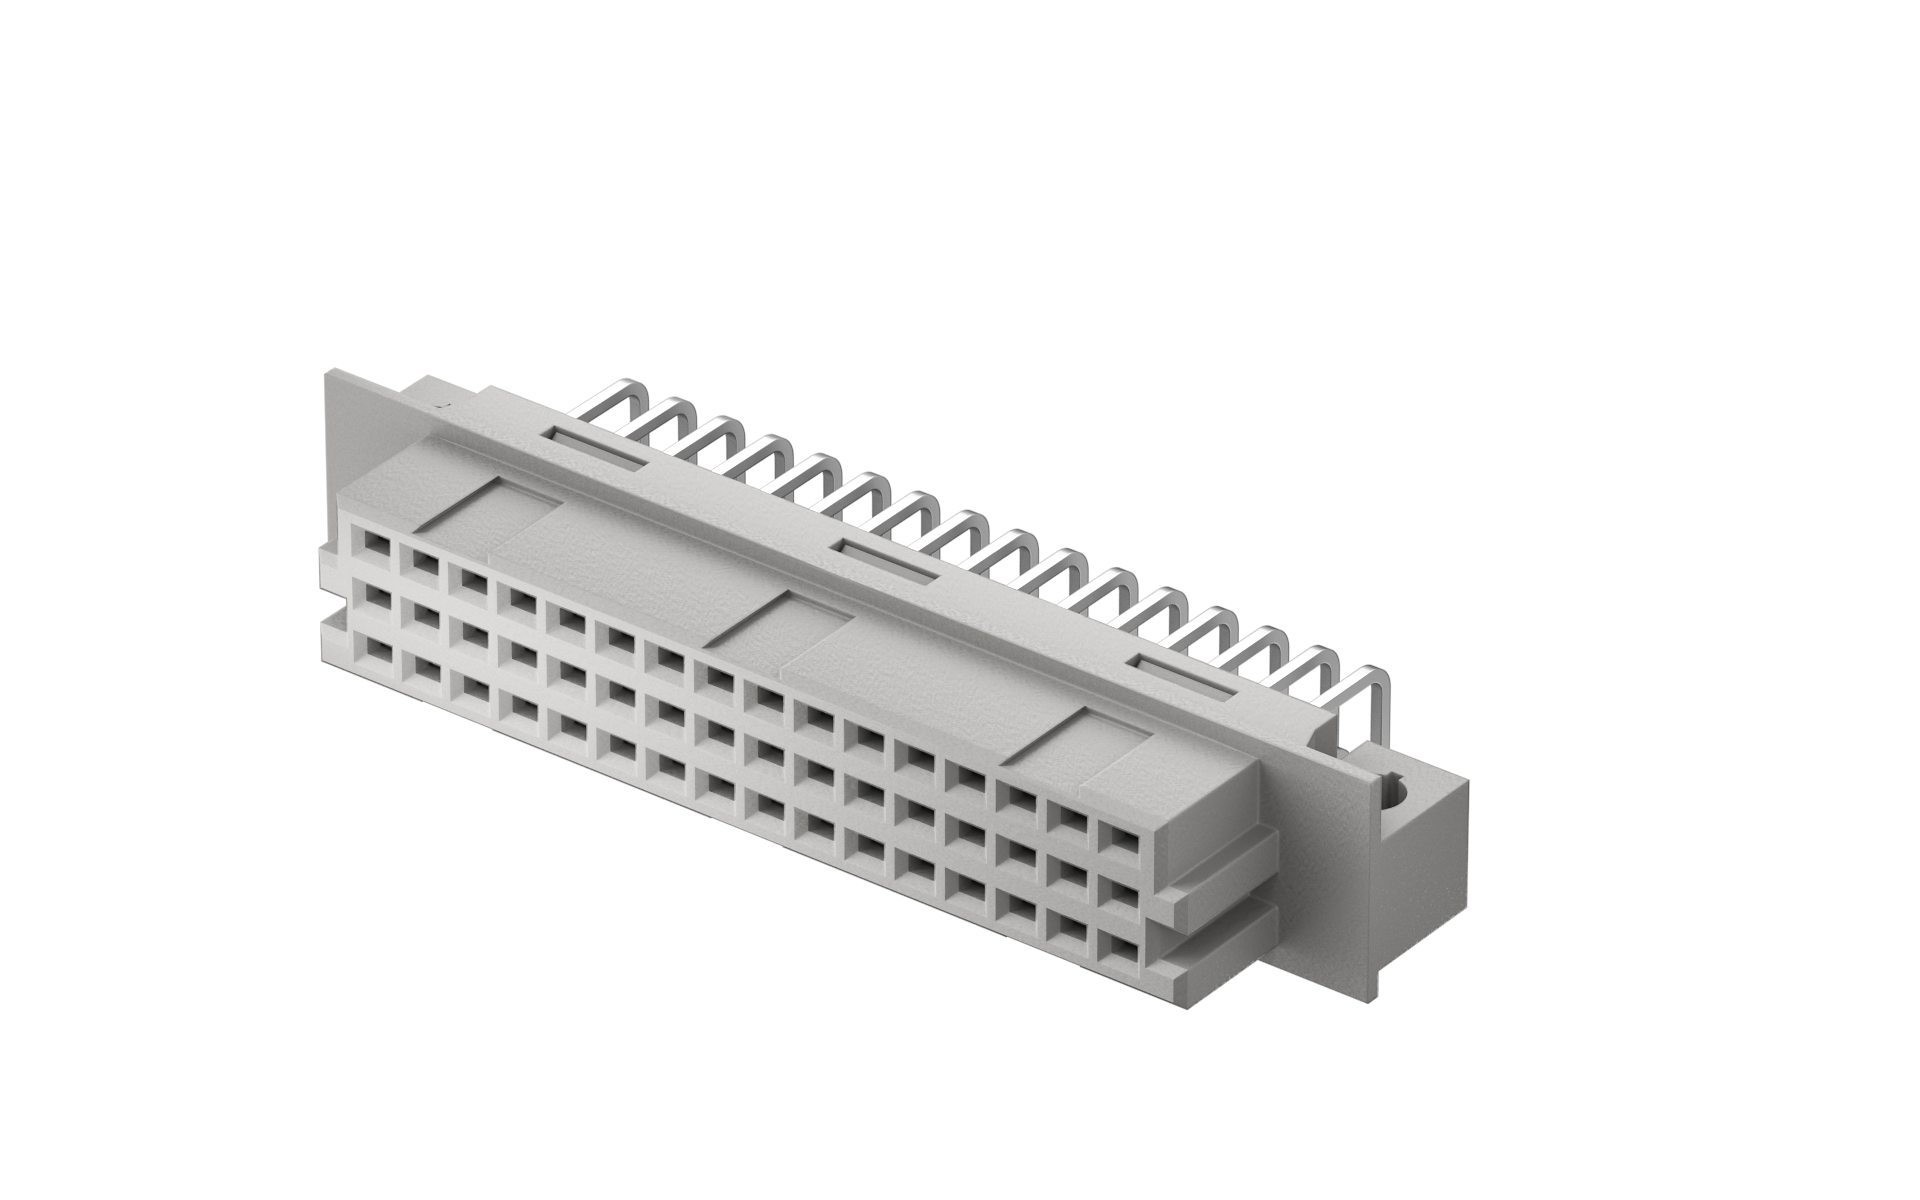 Eurocard Connector,2.54mm,Female,3 rows,48Circuits,Right angle(90°),Through hole